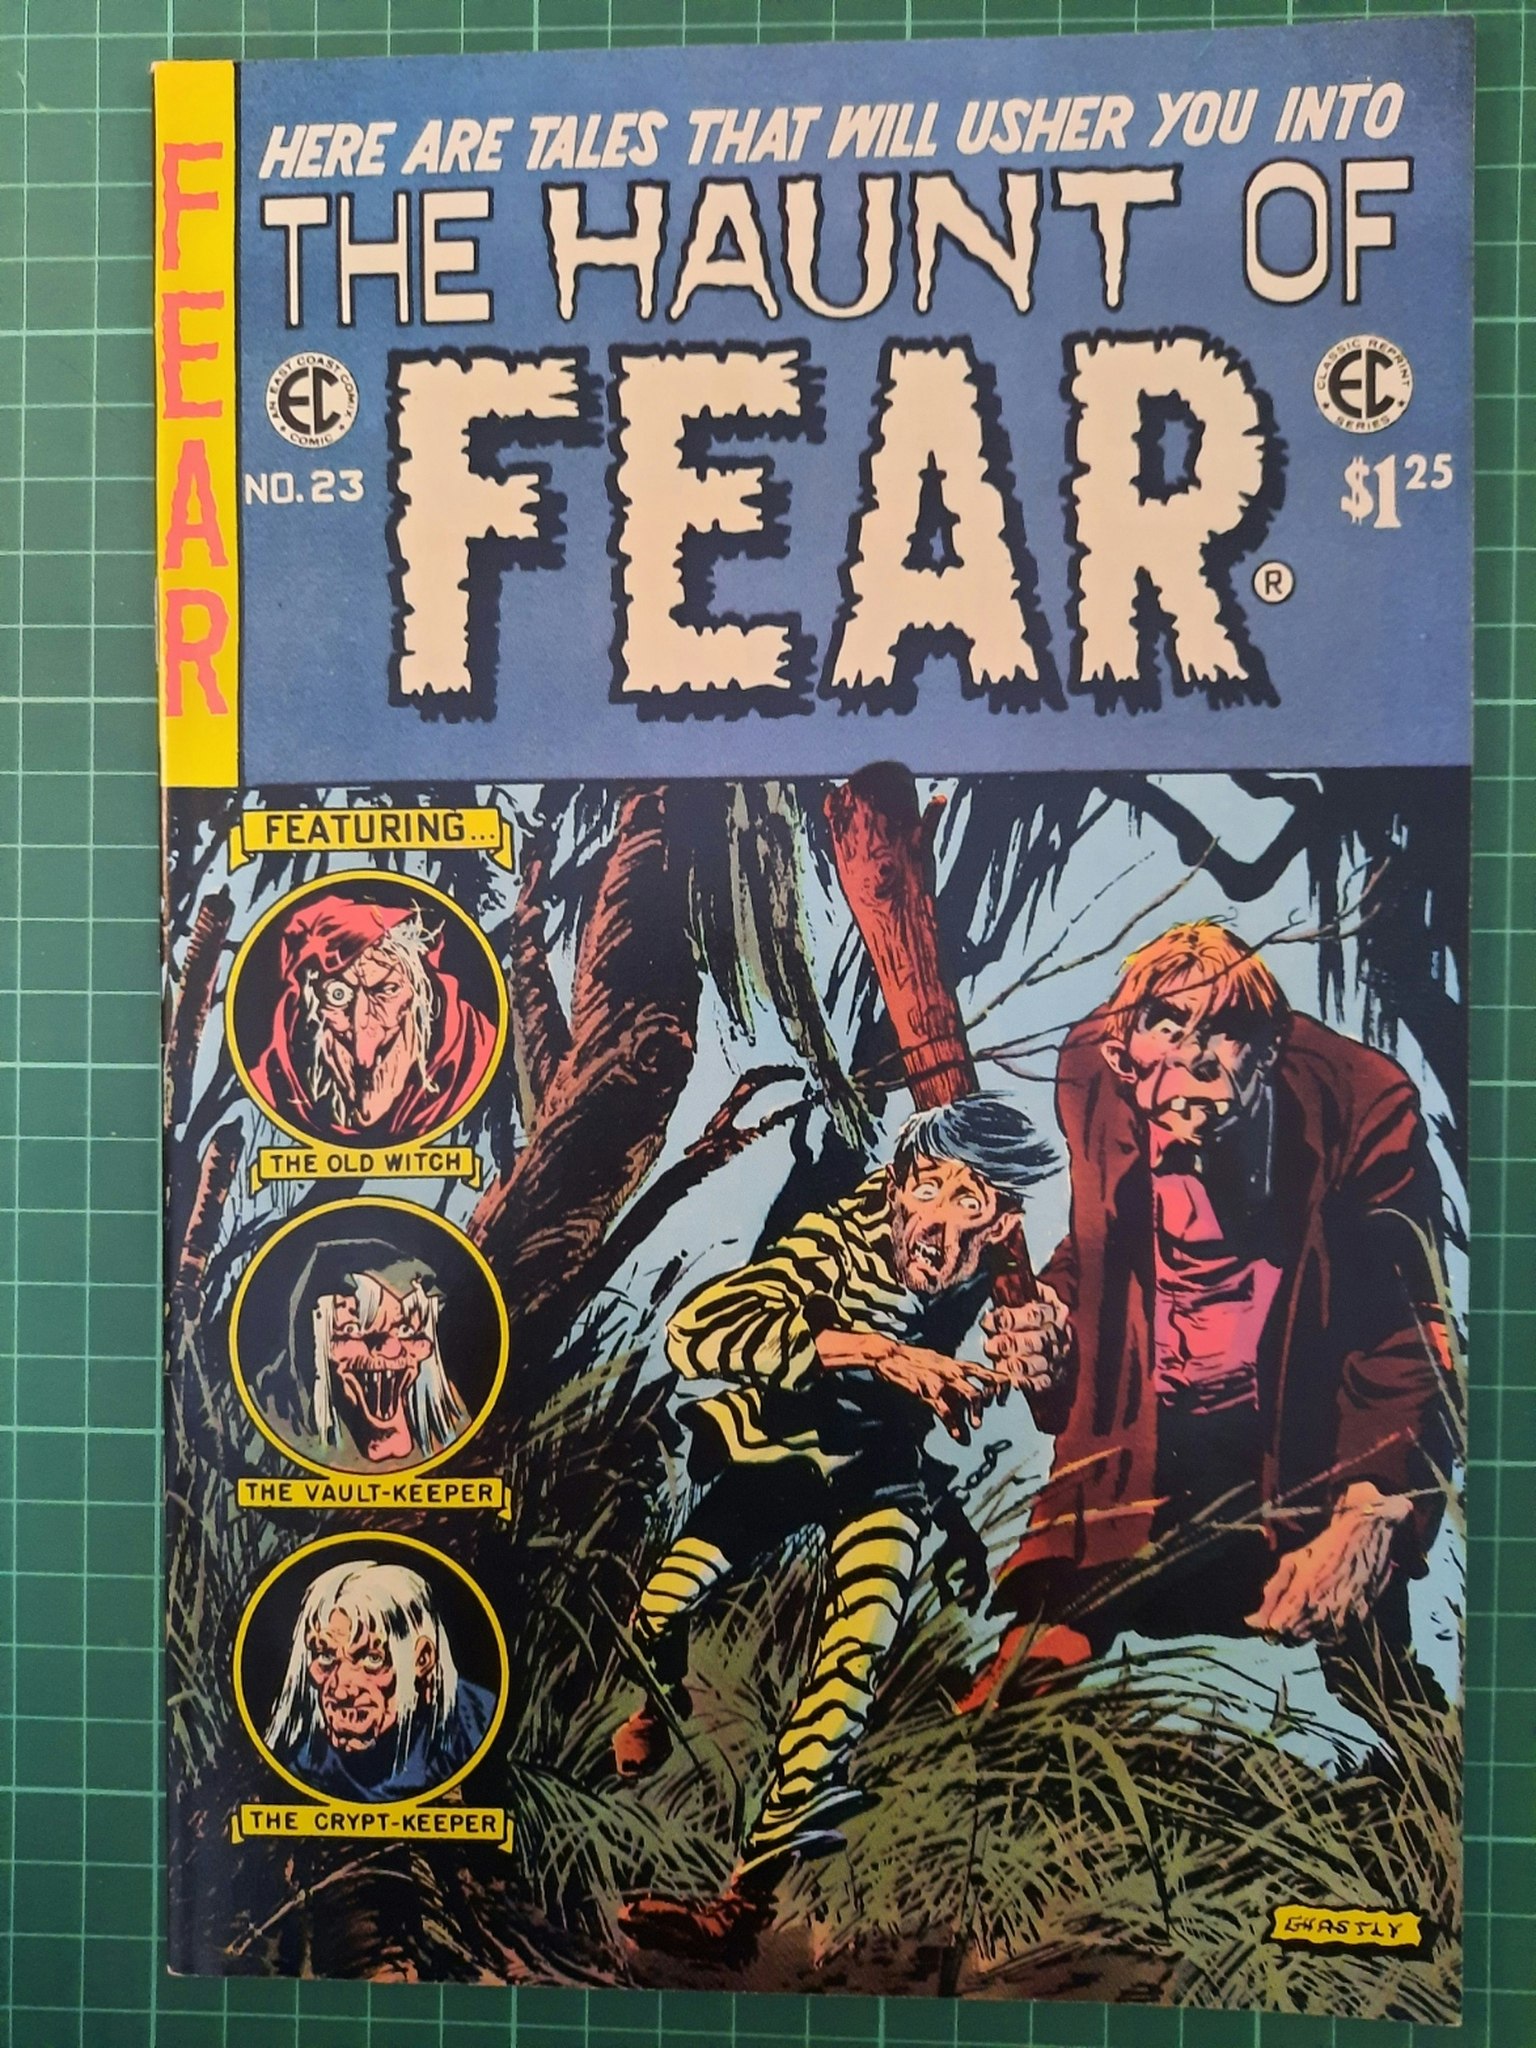 The haunt of fear #23